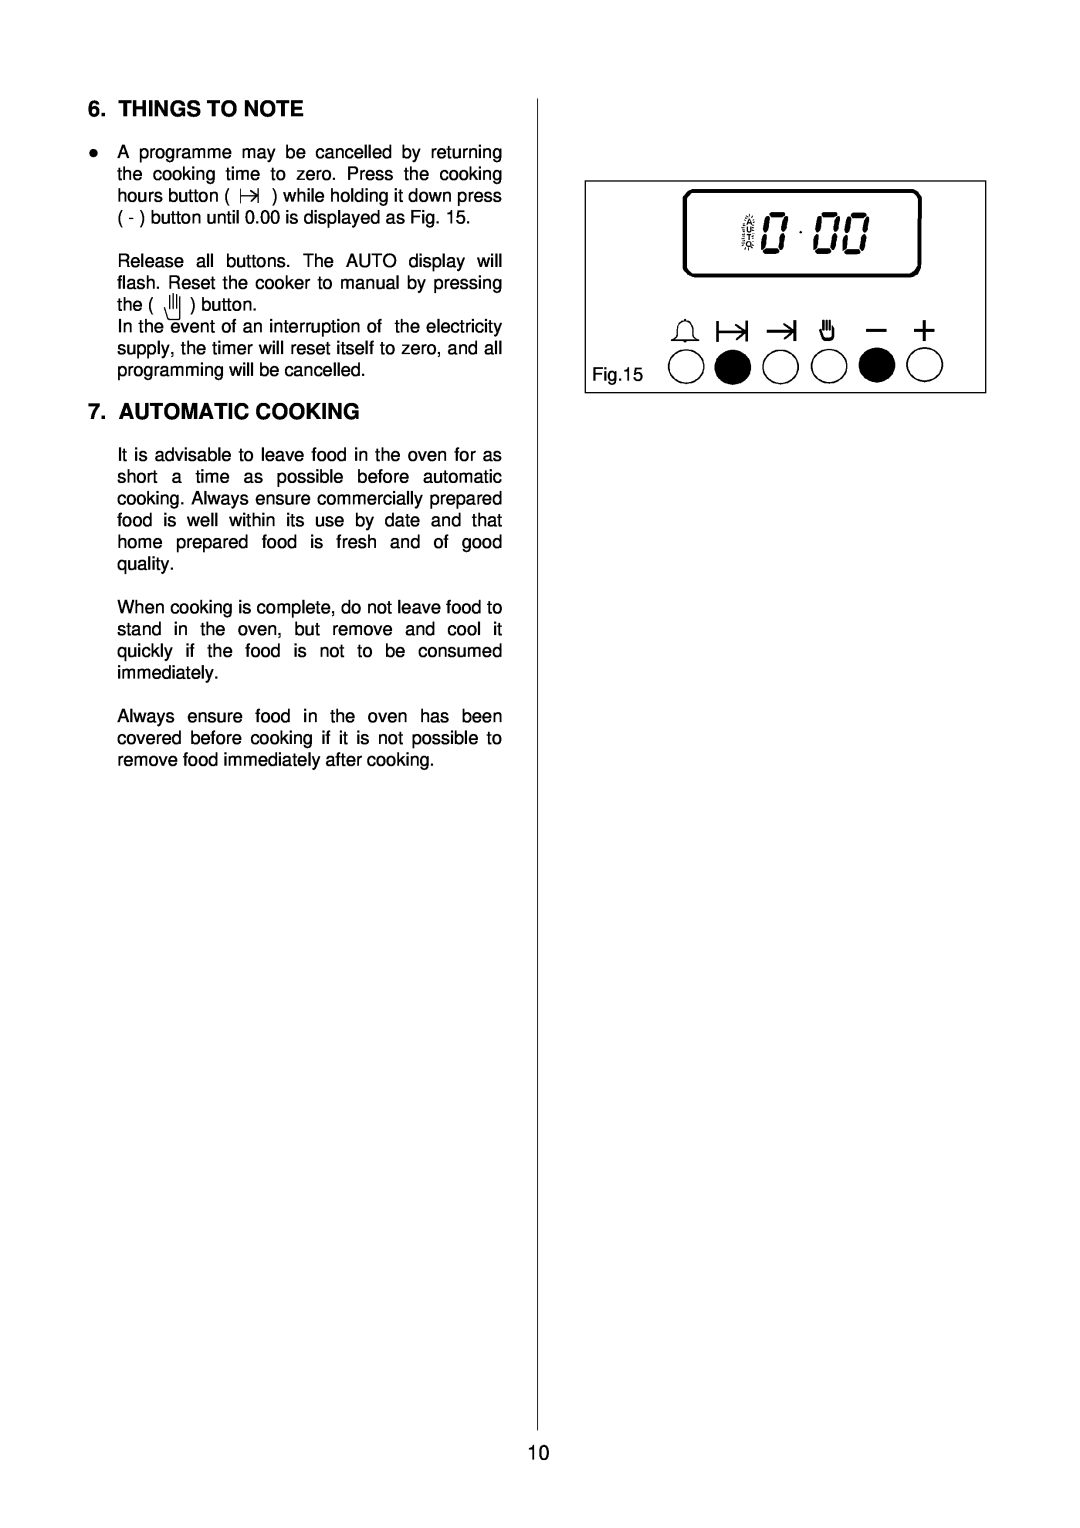 Electrolux D2160 installation instructions lTHINGS TO NOTE, Automatic Cooking 